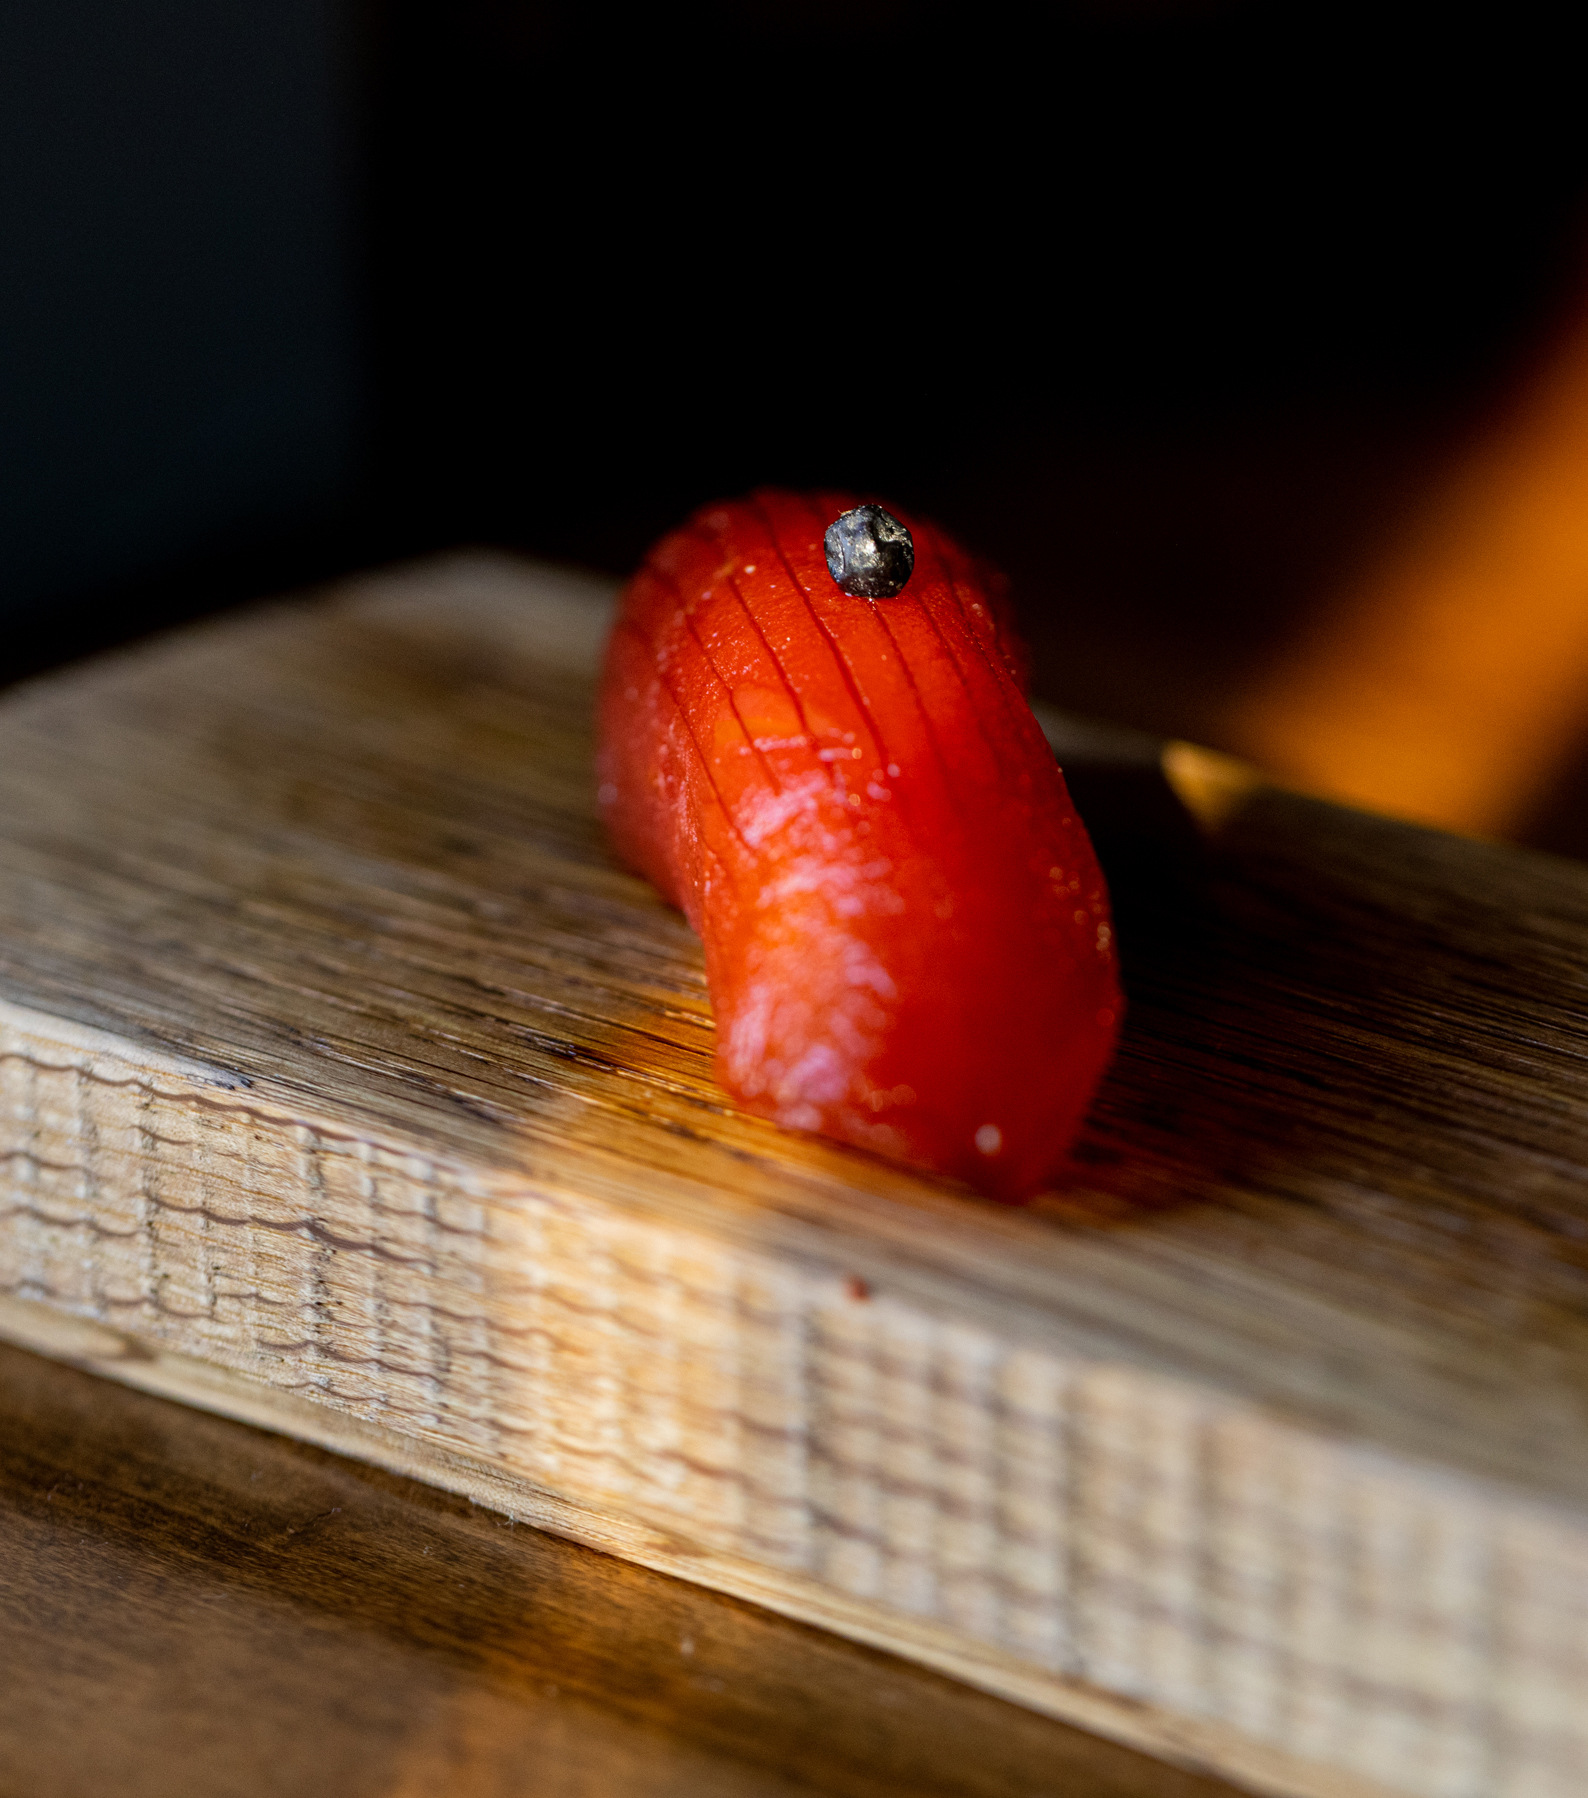 A piece of finely sliced red fish sushi, garnished with a small black element, is placed on a textured wooden block, illuminated warmly.